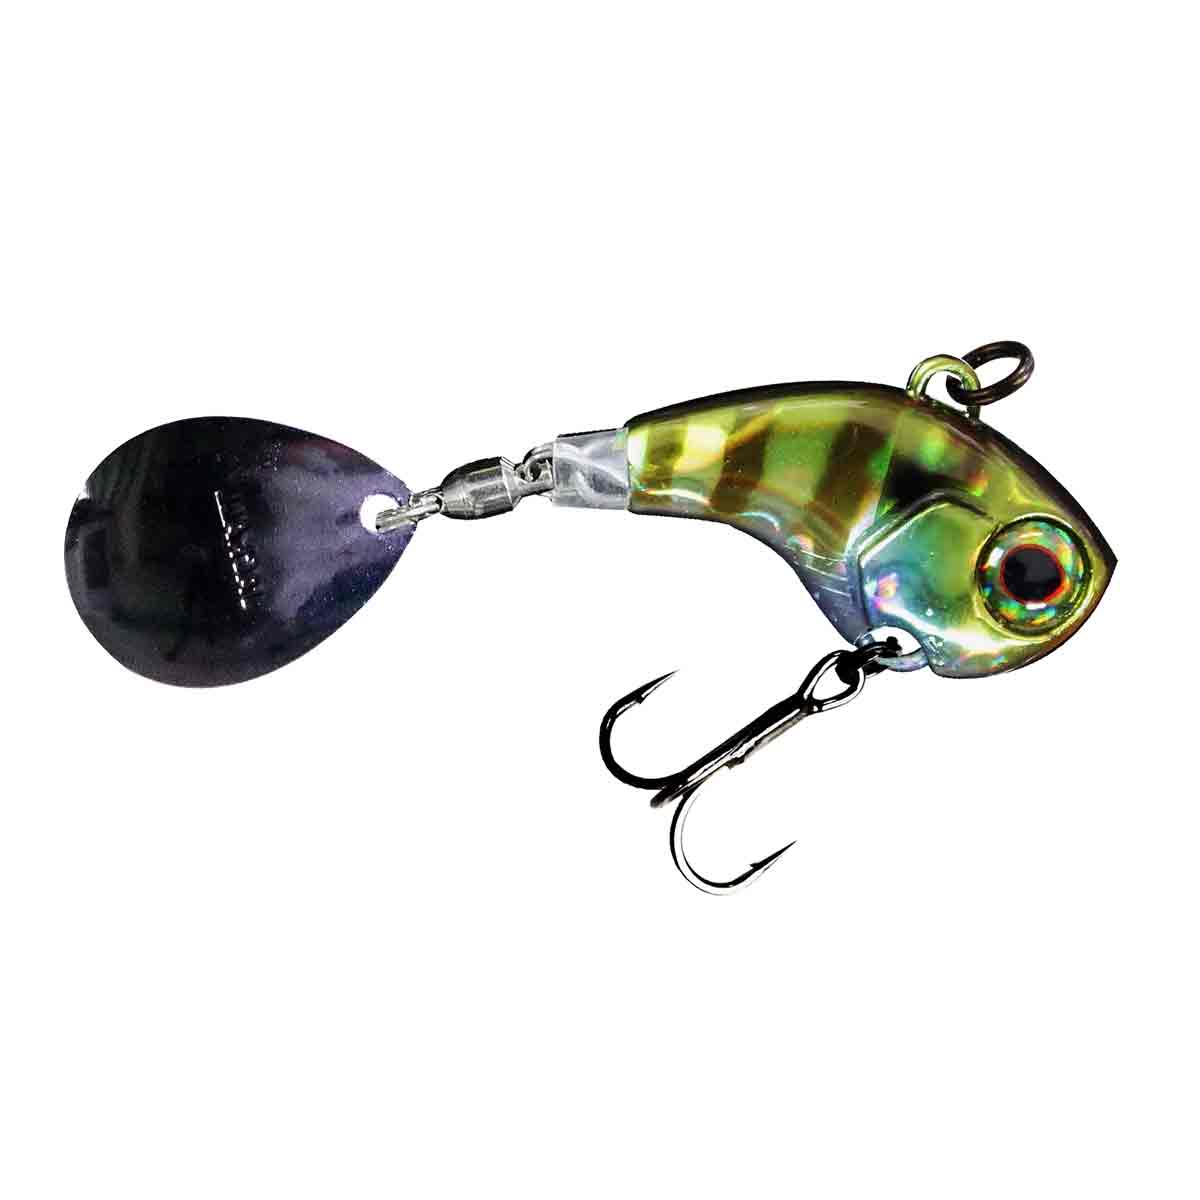 Deracoup Tail Spinner_HL Bluegill*